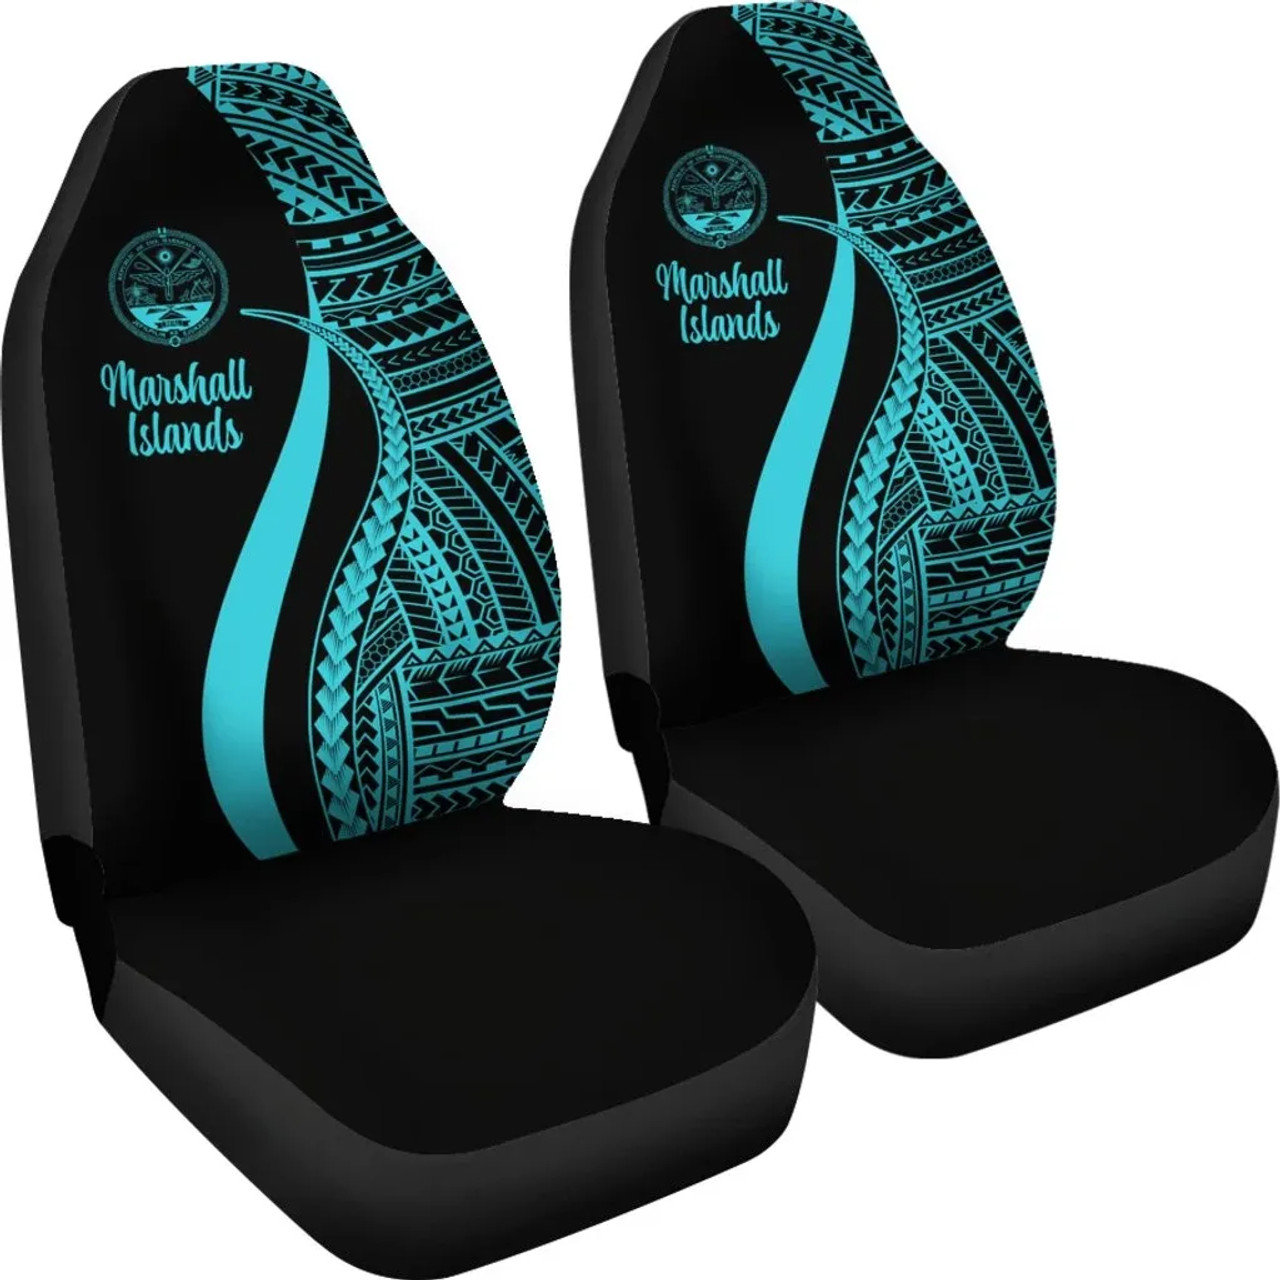 Marshall Islands Car Seat Covers - Turquoise Polynesian Tentacle Tribal Pattern Crest